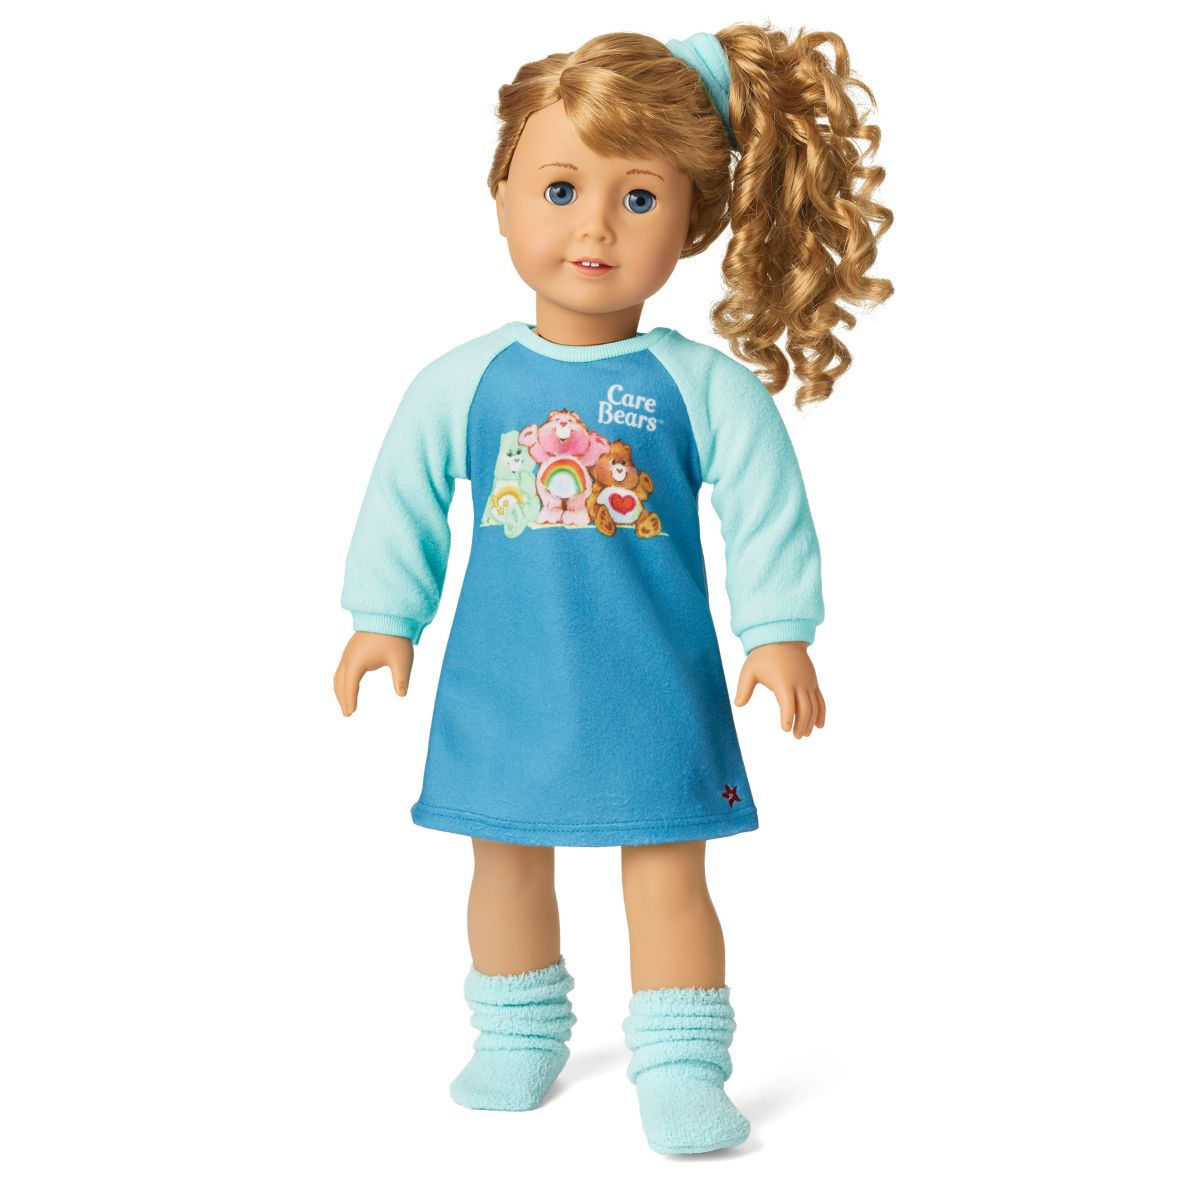 American Girl's New Doll Is from 1986 - Meet Courtney Moore